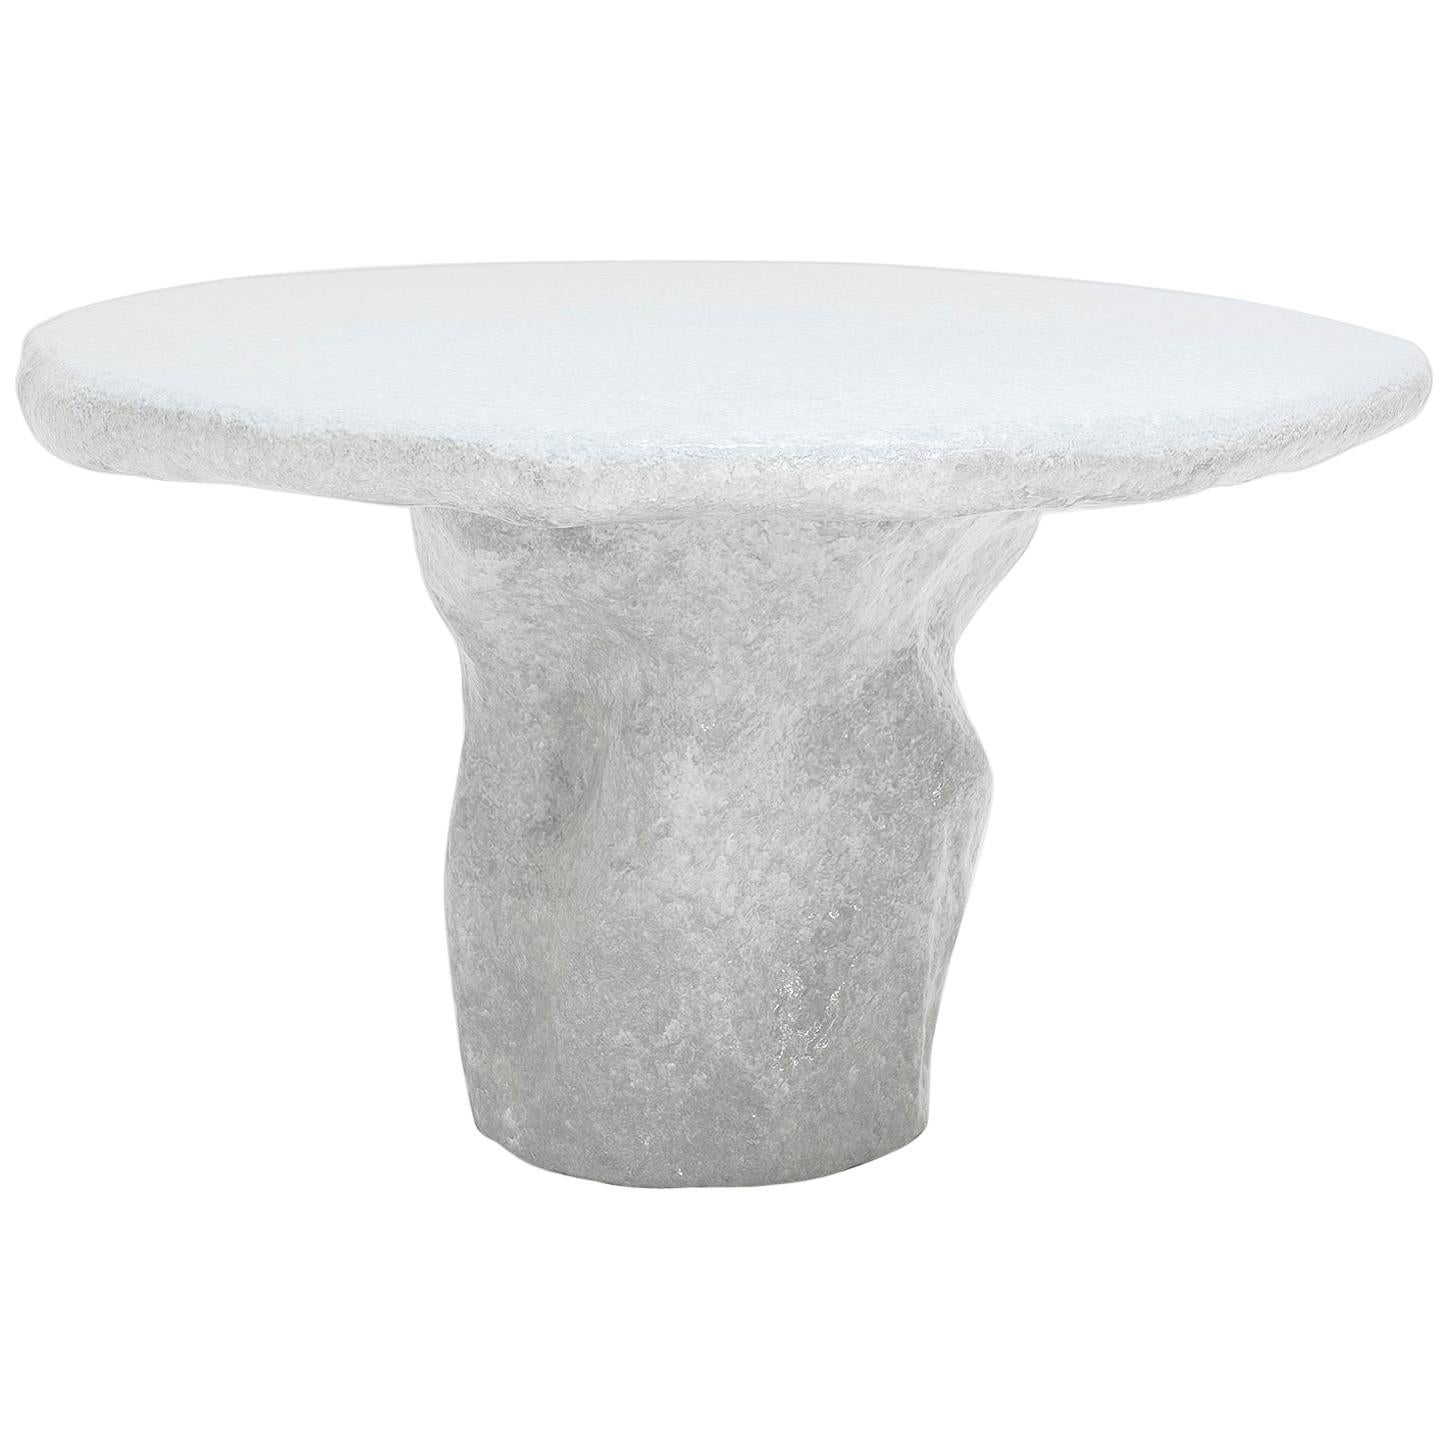  Lukas Saint-Joigny, Contemporary Round Dining Table, 2020, Light Grey Resin  For Sale